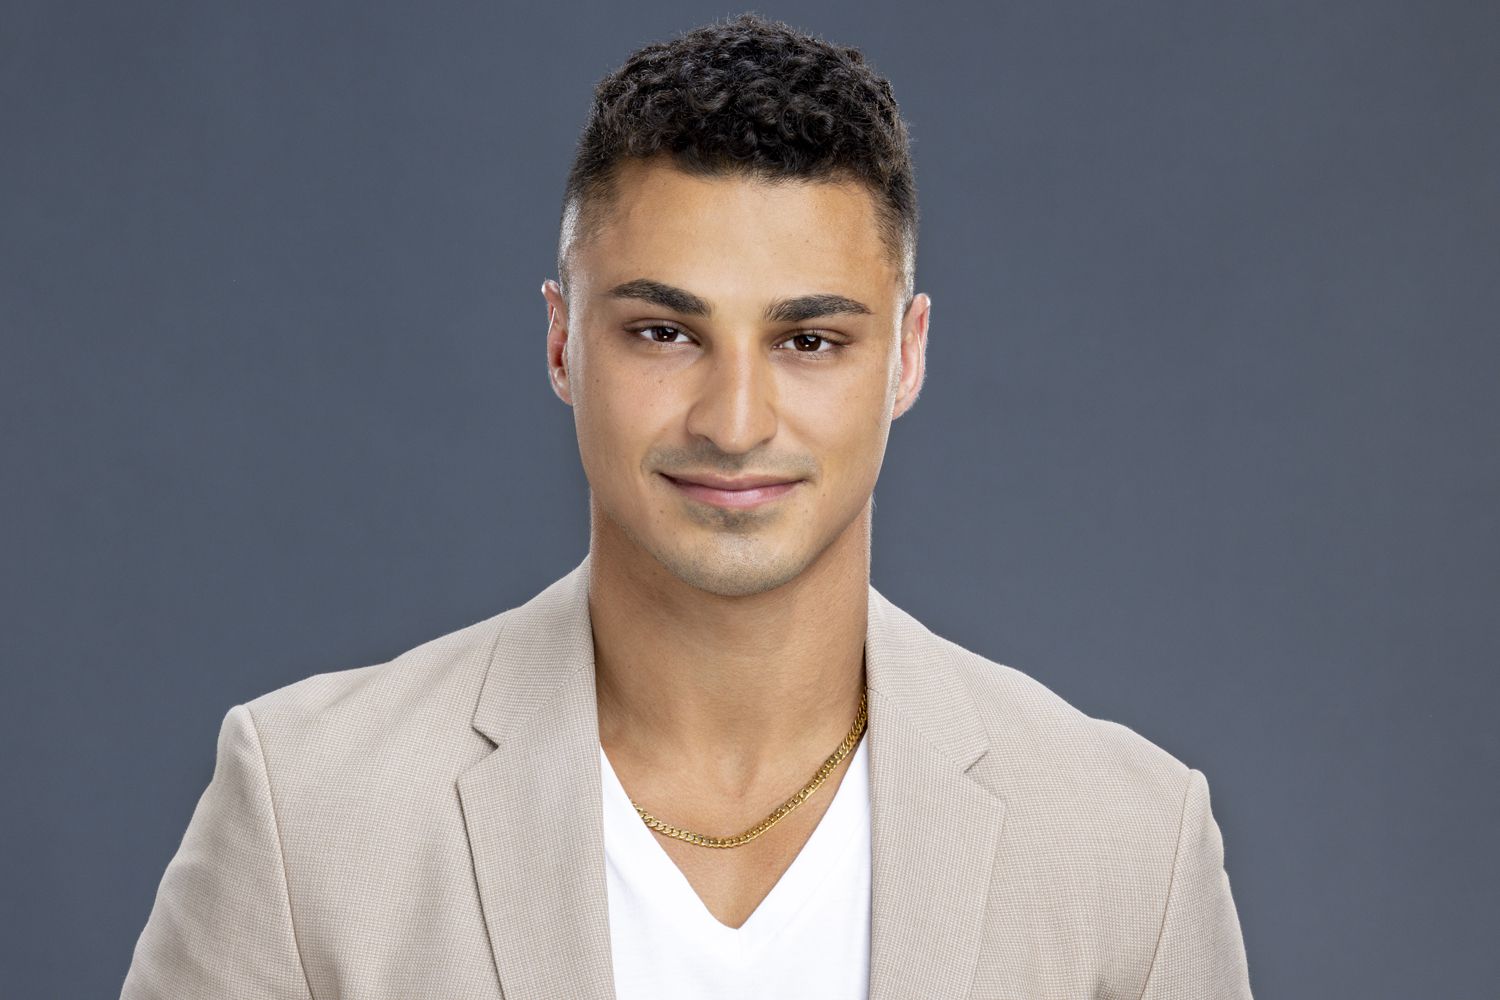 Joesph Abdin, houseguest on the CBS original series BIG BROTHER